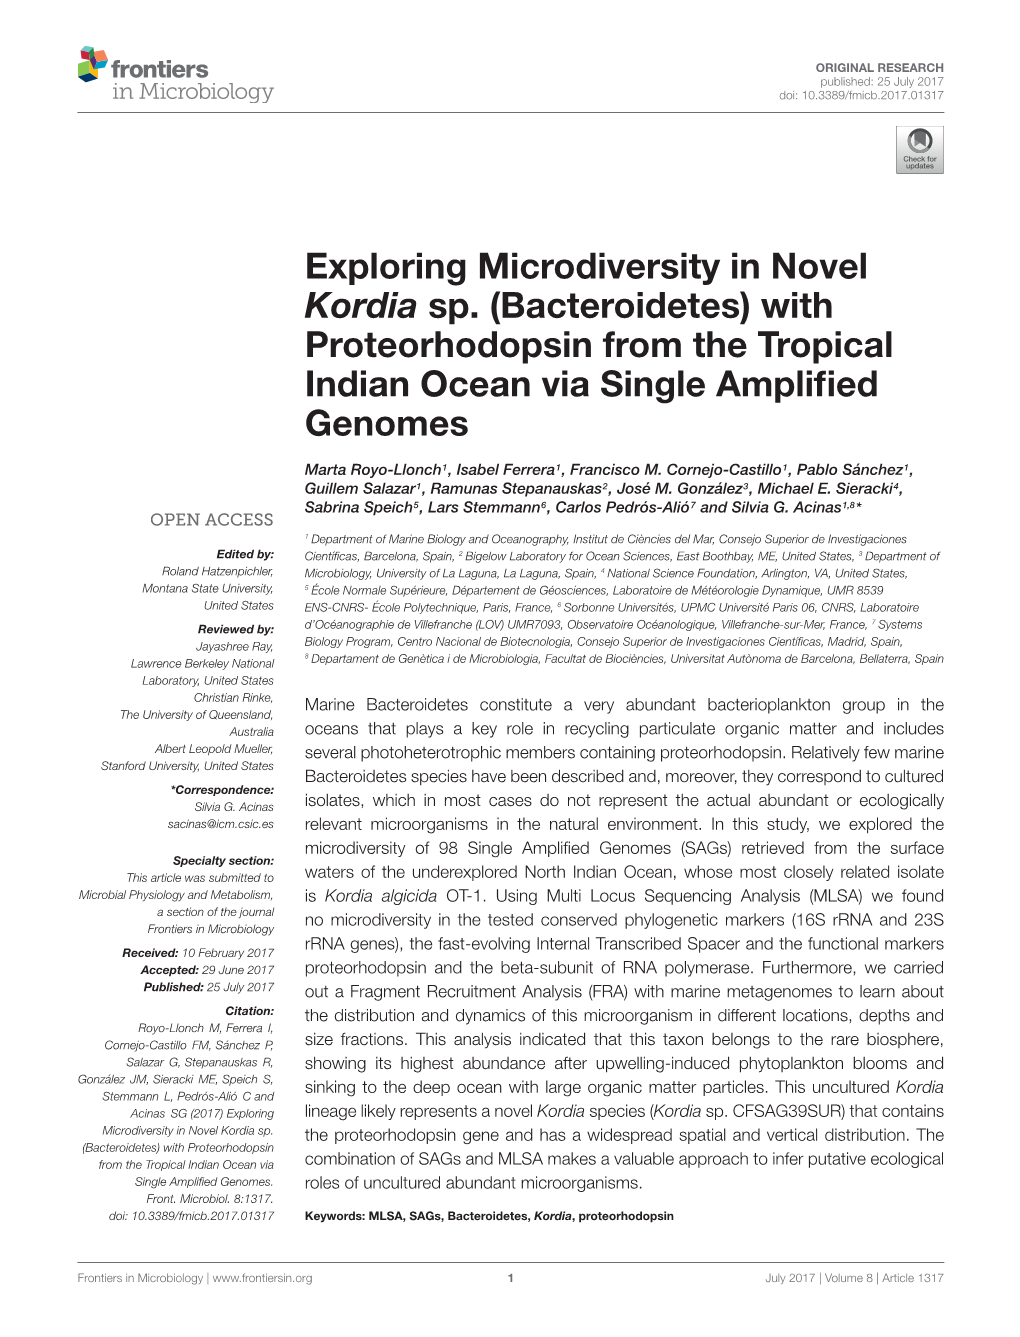 Exploring Microdiversity in Novel Kordia Sp. (Bacteroidetes) with Proteorhodopsin from the Tropical Indian Ocean Via Single Ampliﬁed Genomes